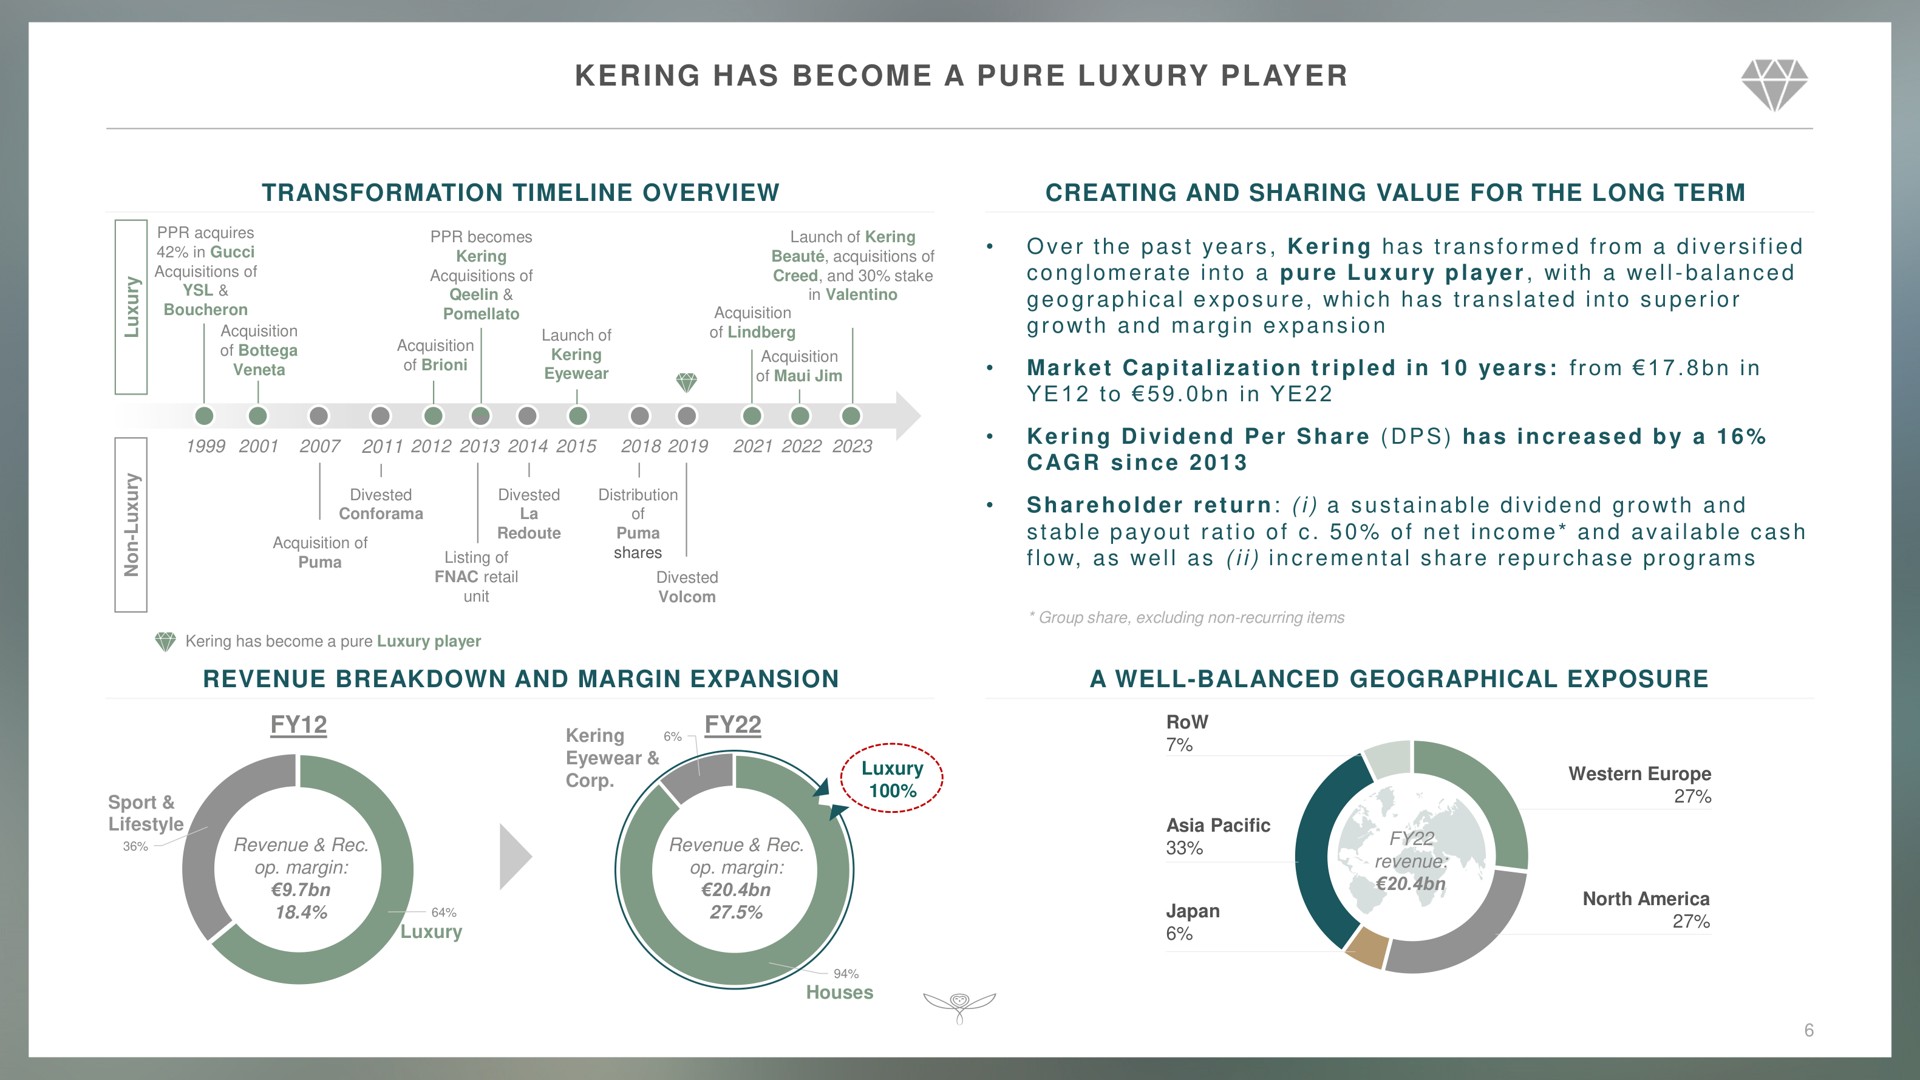 has become a pure luxury player transformation overview creating and sharing value for the long term revenue breakdown and margin expansion a well balanced geographical exposure | Kering